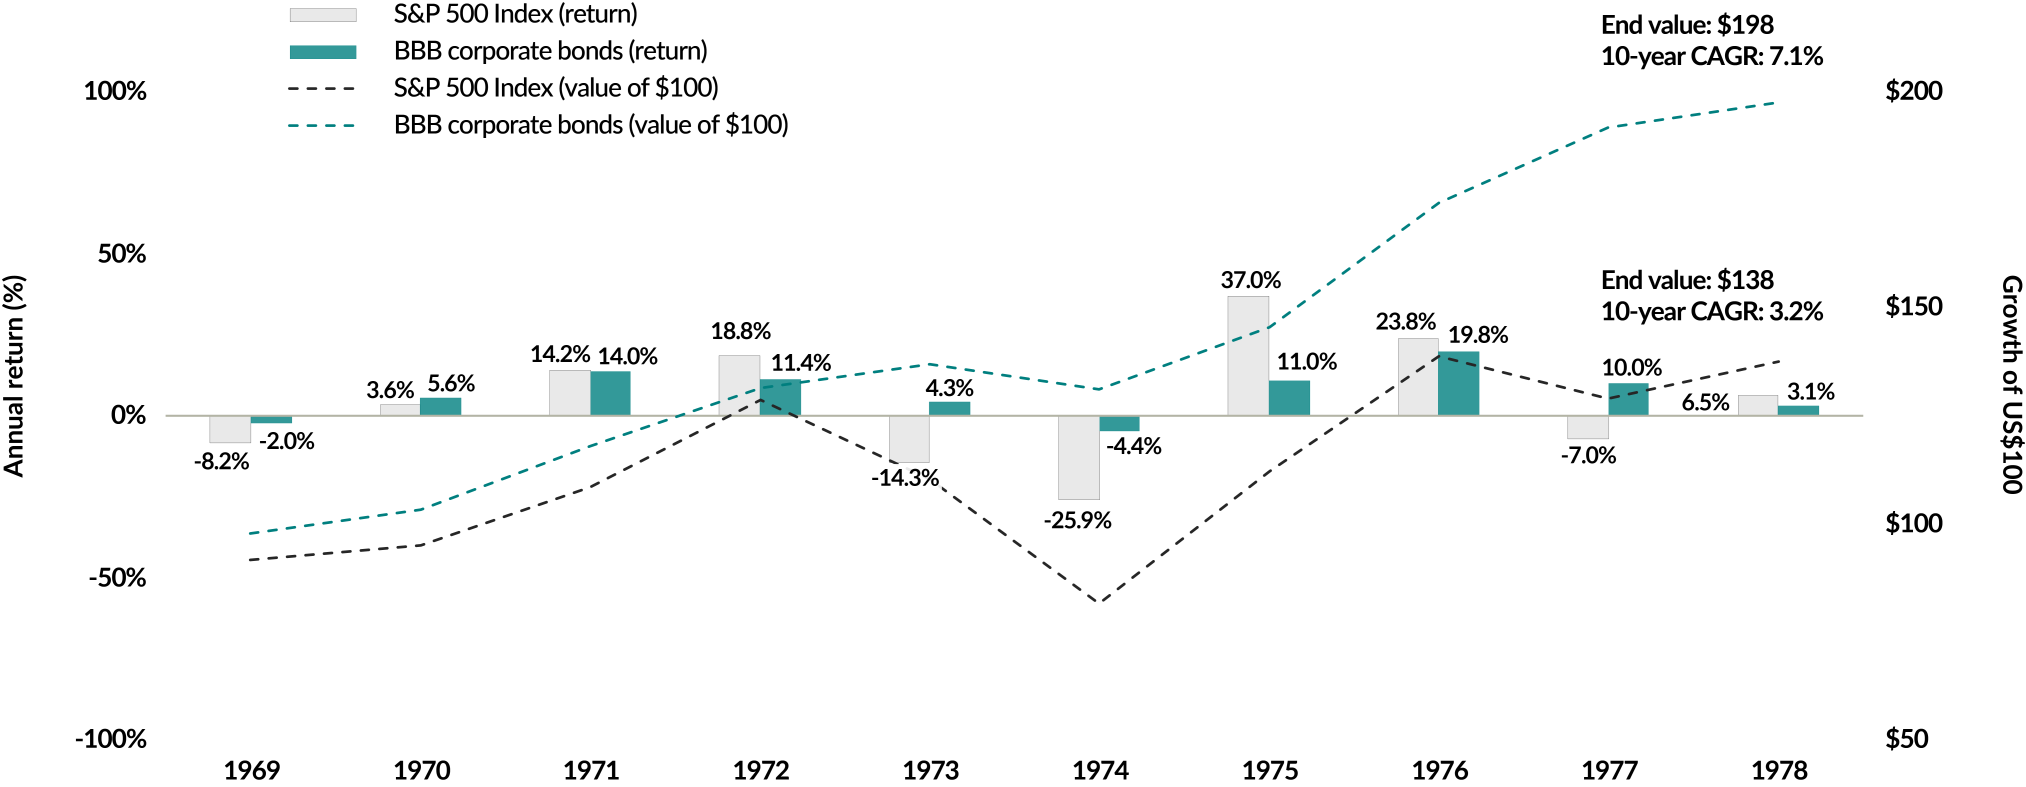 Chart showing the annual returns for the S&P 500 Index and BBB-rated corporate bonds, as well as the growth of US$100 invested in each from the end of 1969 to the end of 1978. Despite four years of returns between 14.2% and 37.0% for the S&P 500 Index, the $100 investment in bonds grew to $198 with a compound annual growth rate of 7.1% compared to the investment in the equity index grew to $138 with a 3.2% annualized growth rate.